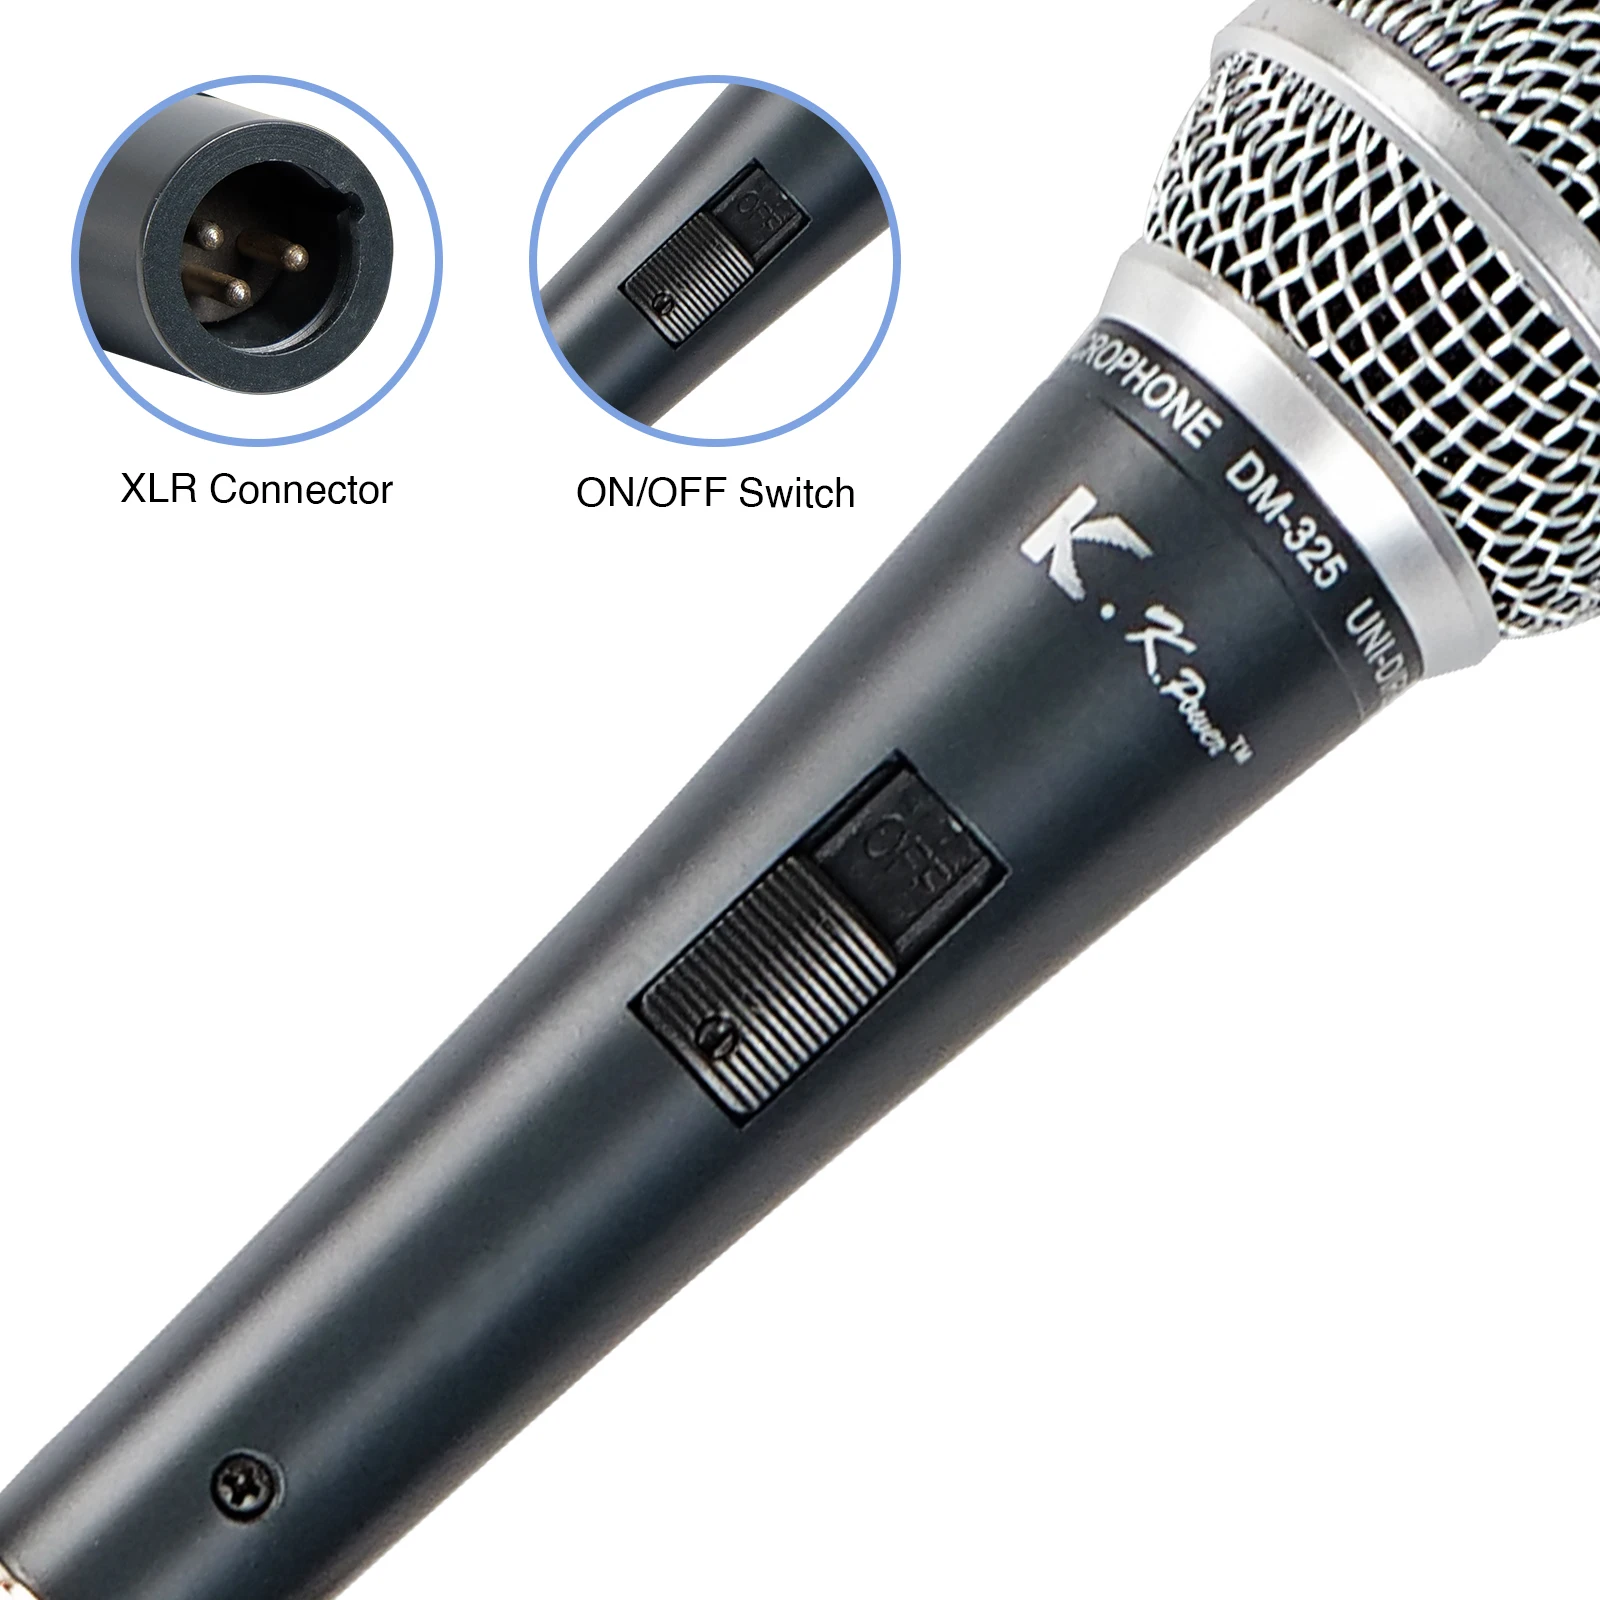 Wired ALL METAL Handheld Dynamic Microphone, Unidirectional Cardioid Pattern, XLR Conenctor for Vocal/Karaoke/Party SN-DM325） gaming microphone